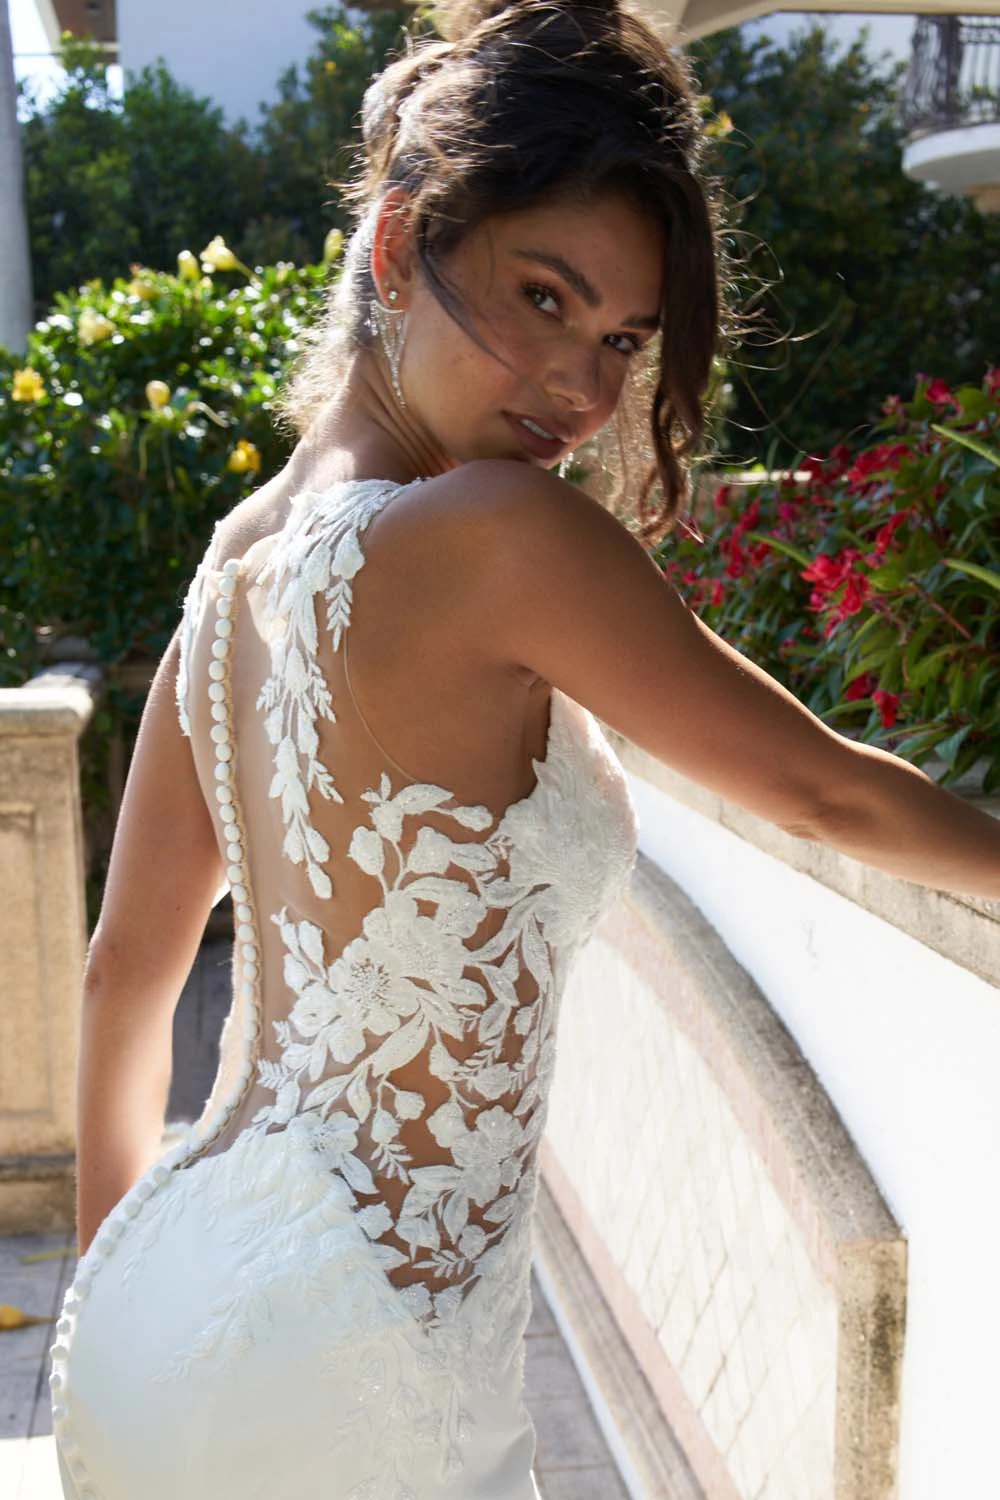 lace sheath wedding dress with cutouts and sheer back - D3544 by Essense of Australia